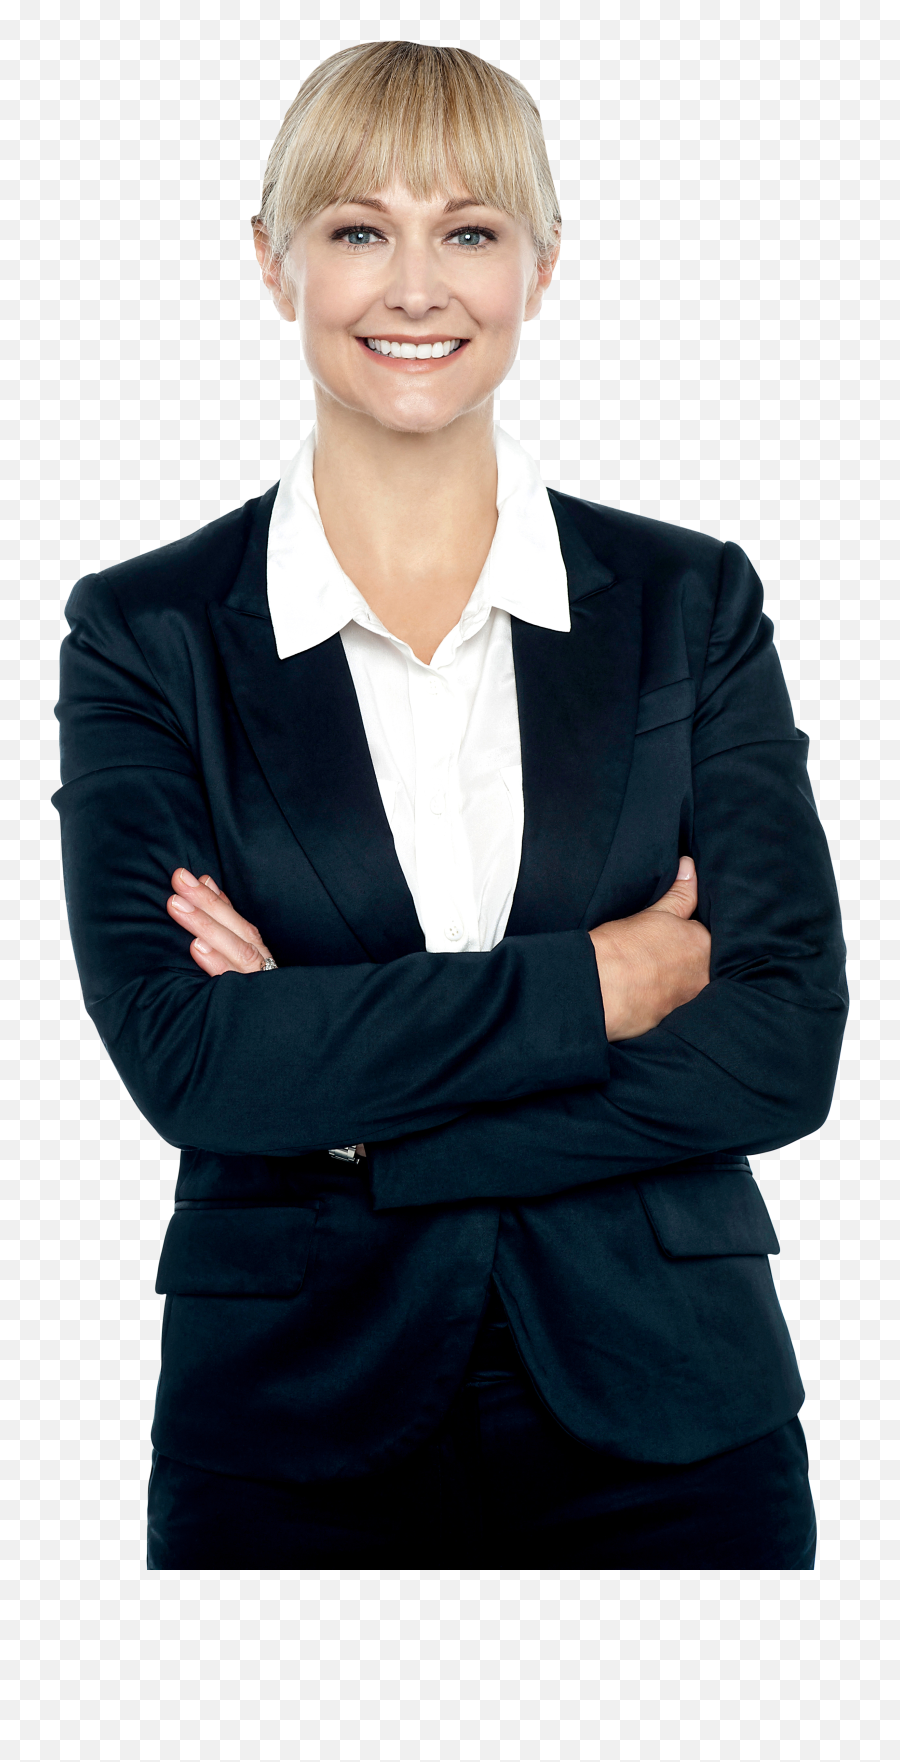 Download Women In Suit Png Image - Businessperson,Suit Png